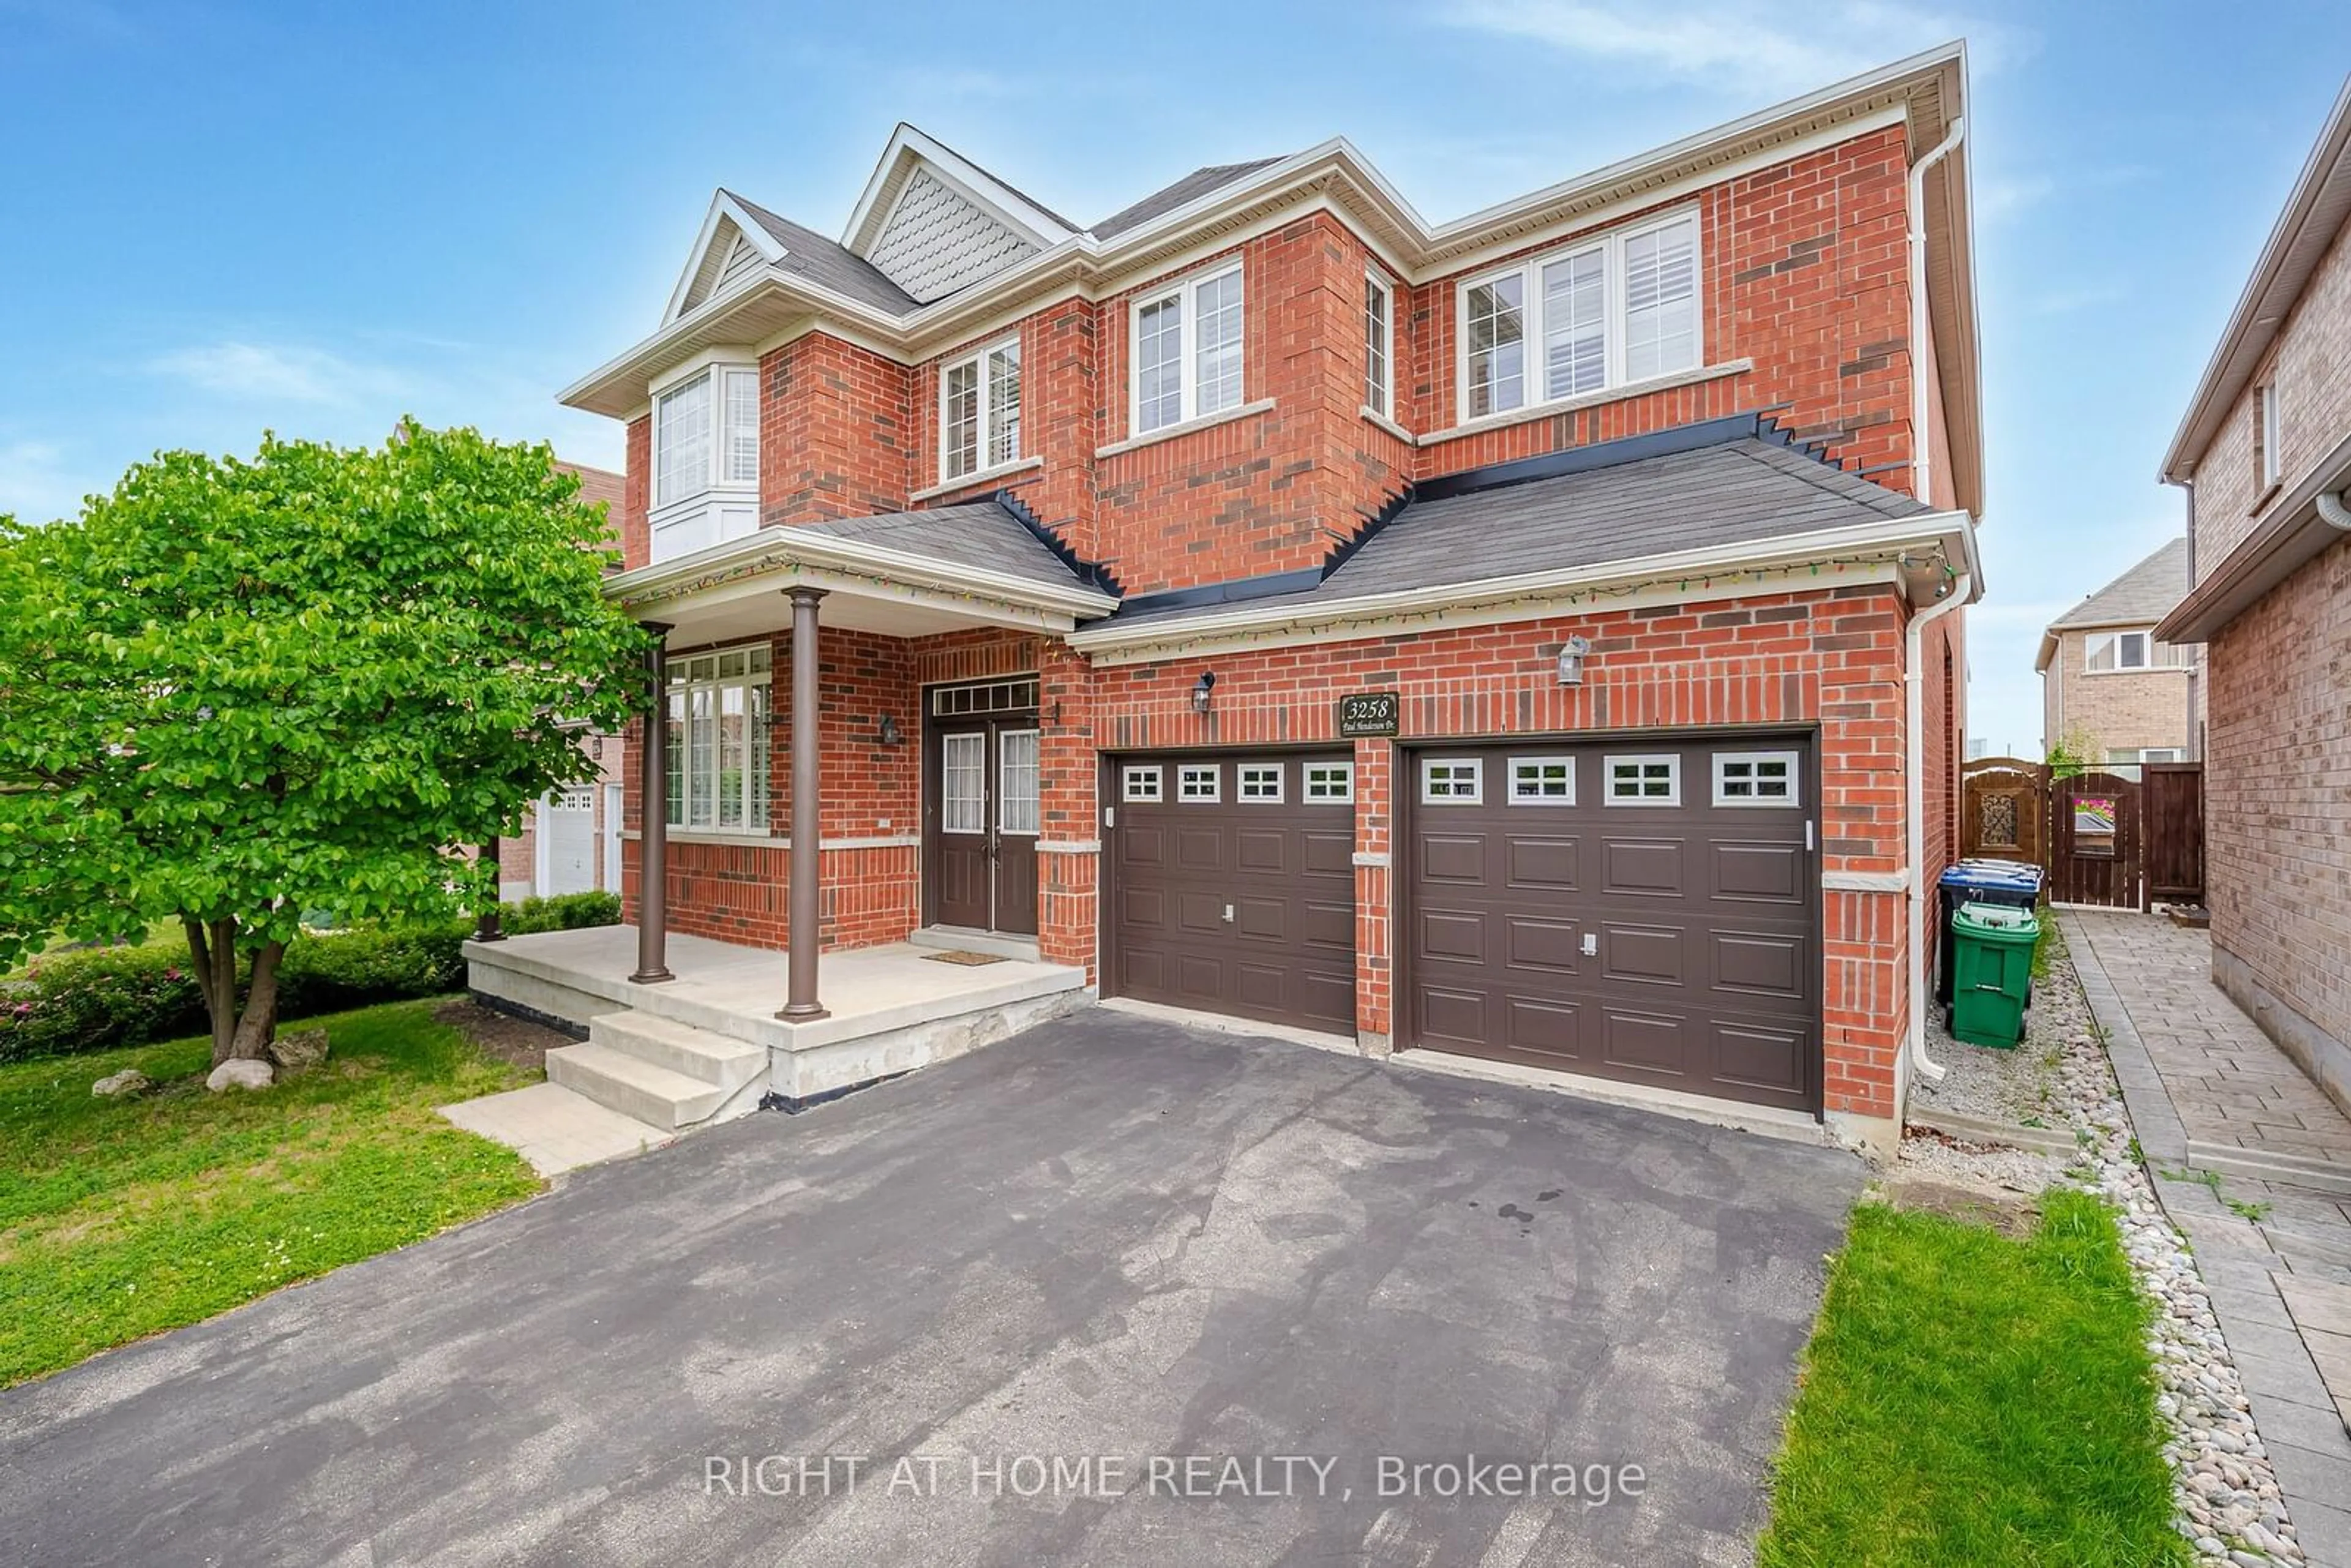 Home with brick exterior material for 3258 Paul Henderson Dr, Mississauga Ontario L5M 0H3